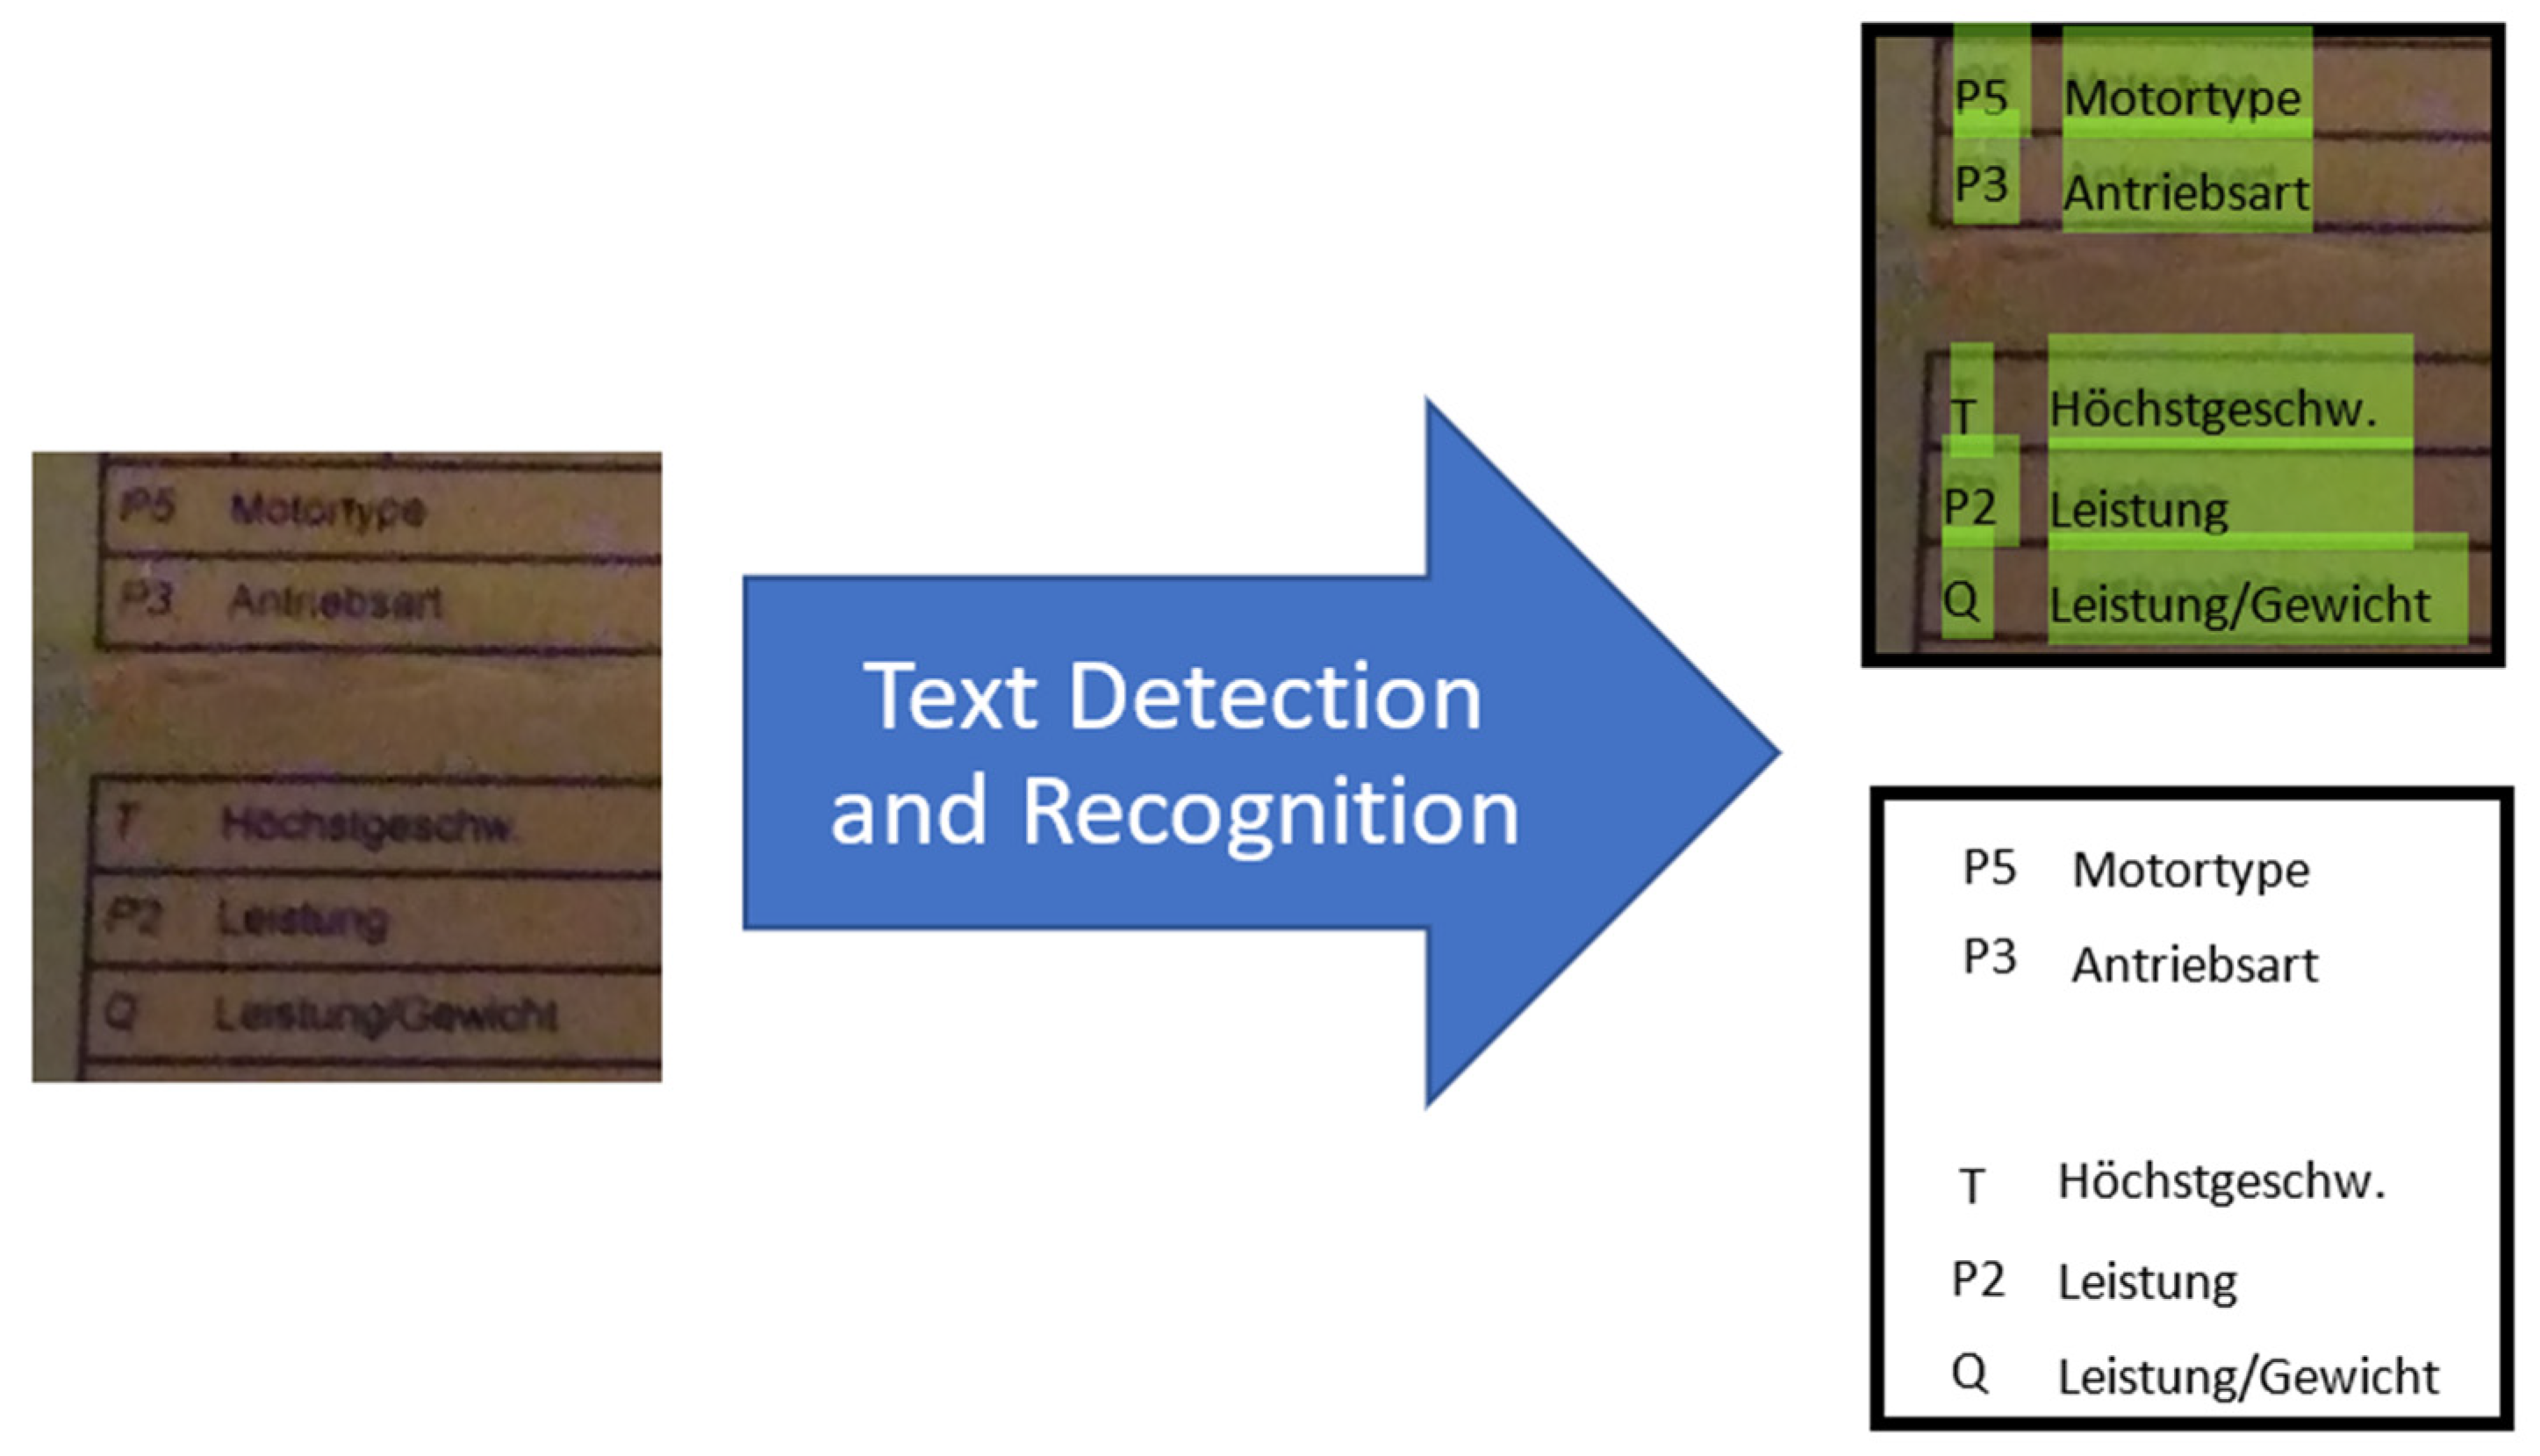 Graphical Glitch Detection in Video Games Using Convolutional